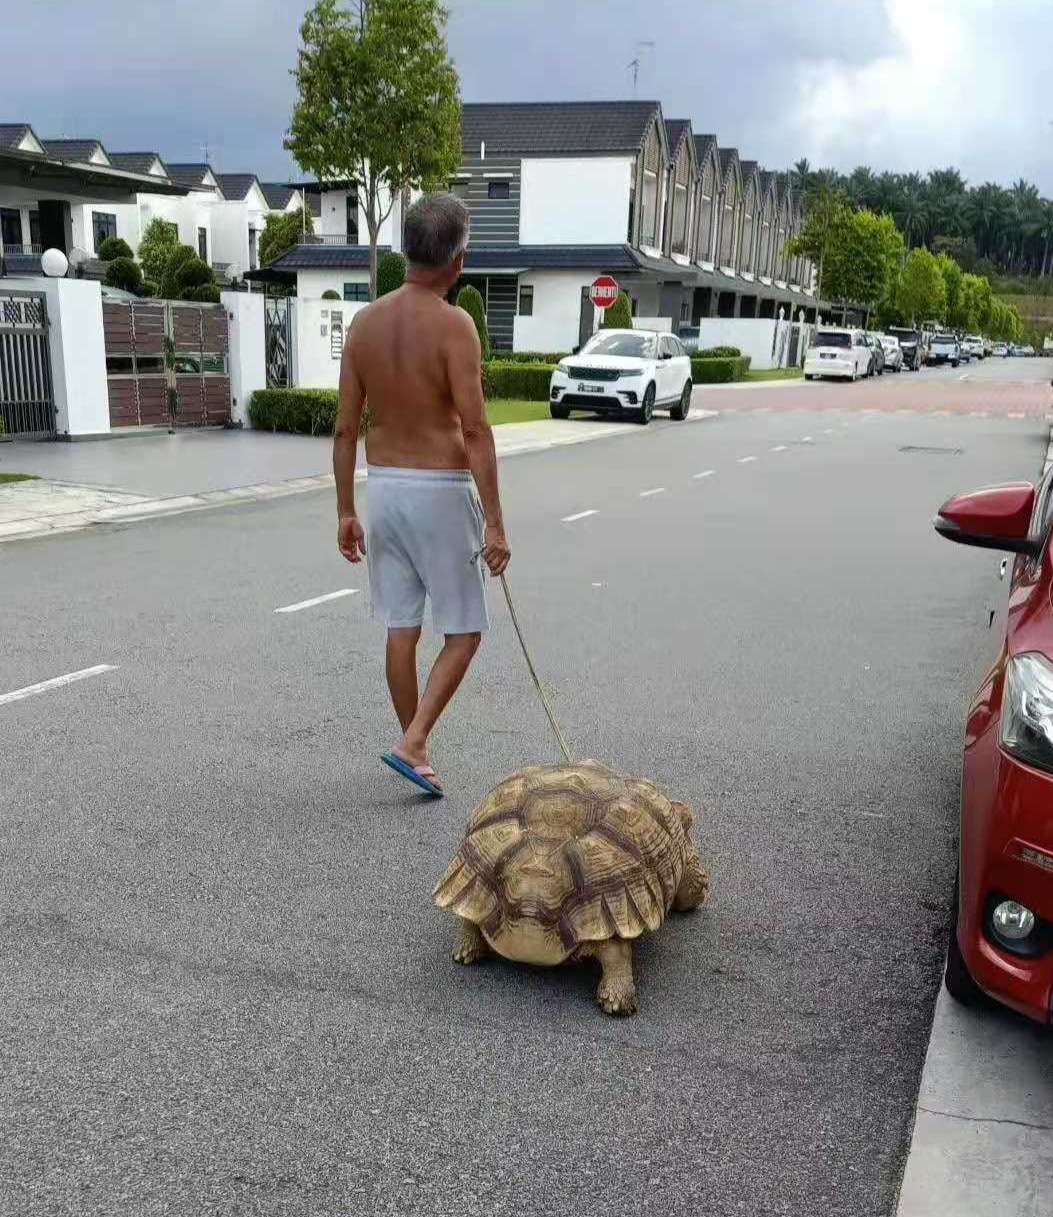 Myvi's tyre-sized giant tortoise spotted on a walk with its owner in the neighbourhood